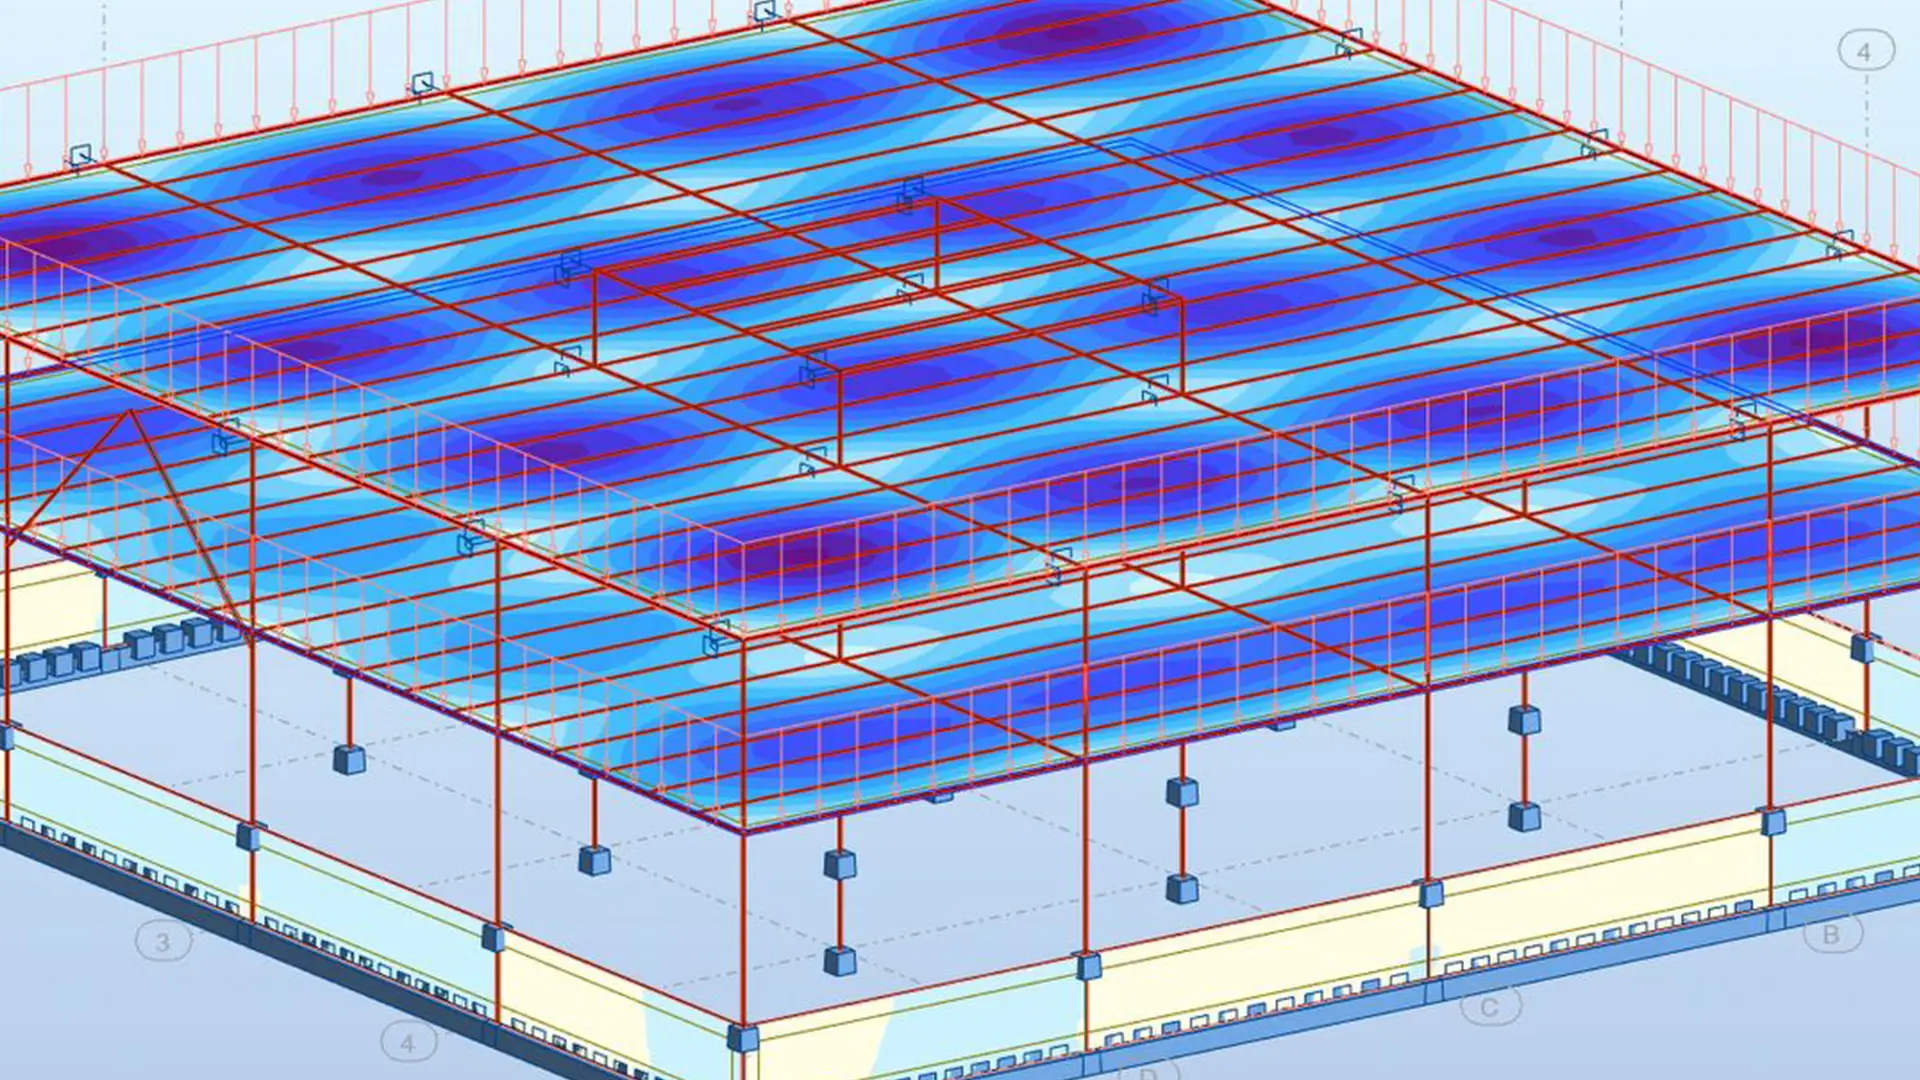 revit-structural-analysis-tools-avaxhome